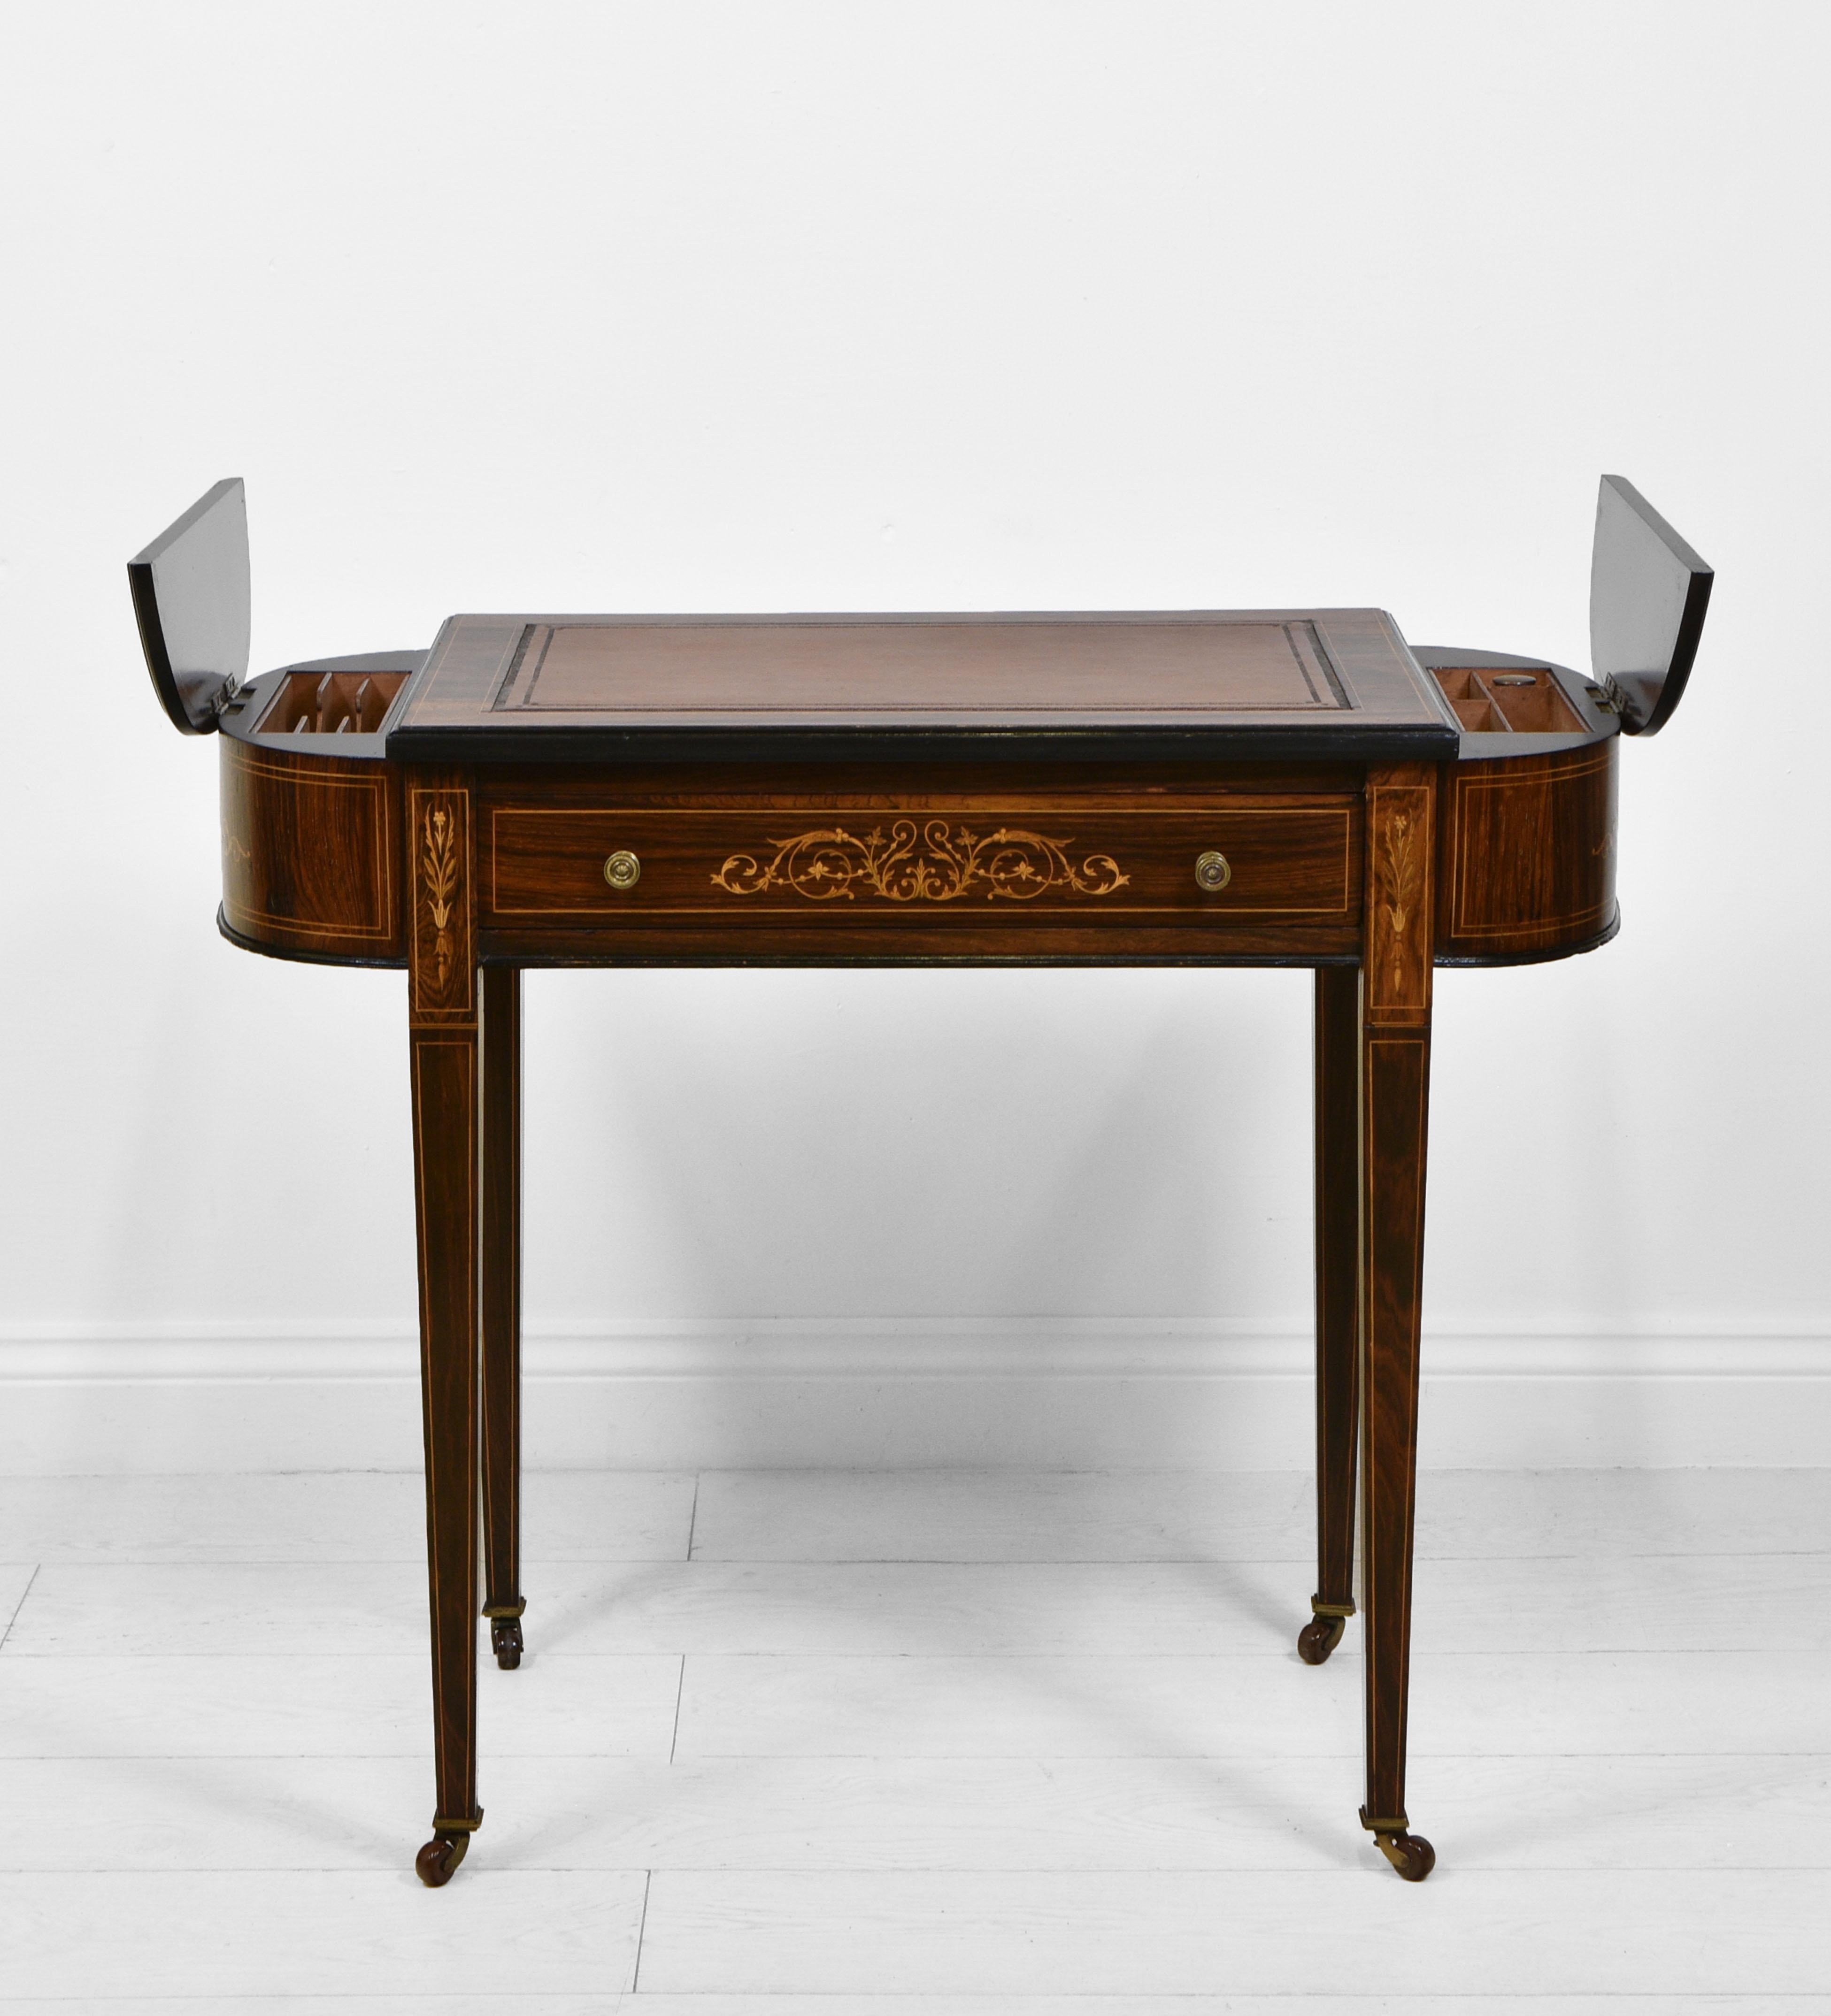 A excellent quality Edwardian rosewood and marquetry inlaid ladies desk, with leather and tooled inset and compartments. Stamped 'Maple & Co Ltd'. Circa 1900s.

The desk's D ends each have a lift up compartment lined in mahogany, ideal for storing